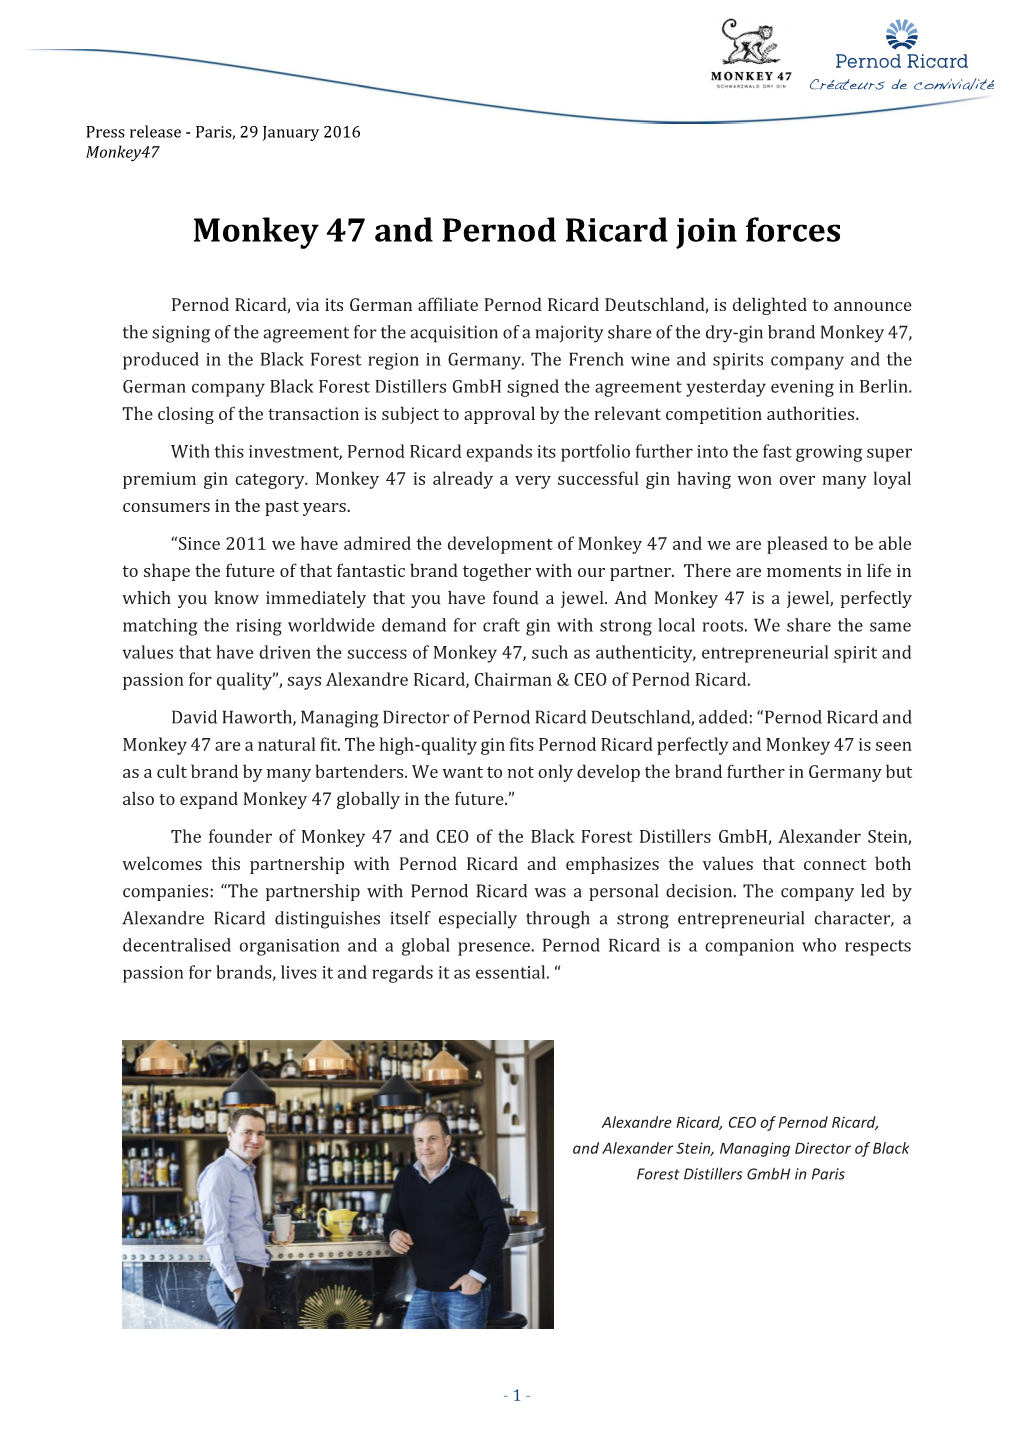 Monkey 47 and Pernod Ricard Join Forces